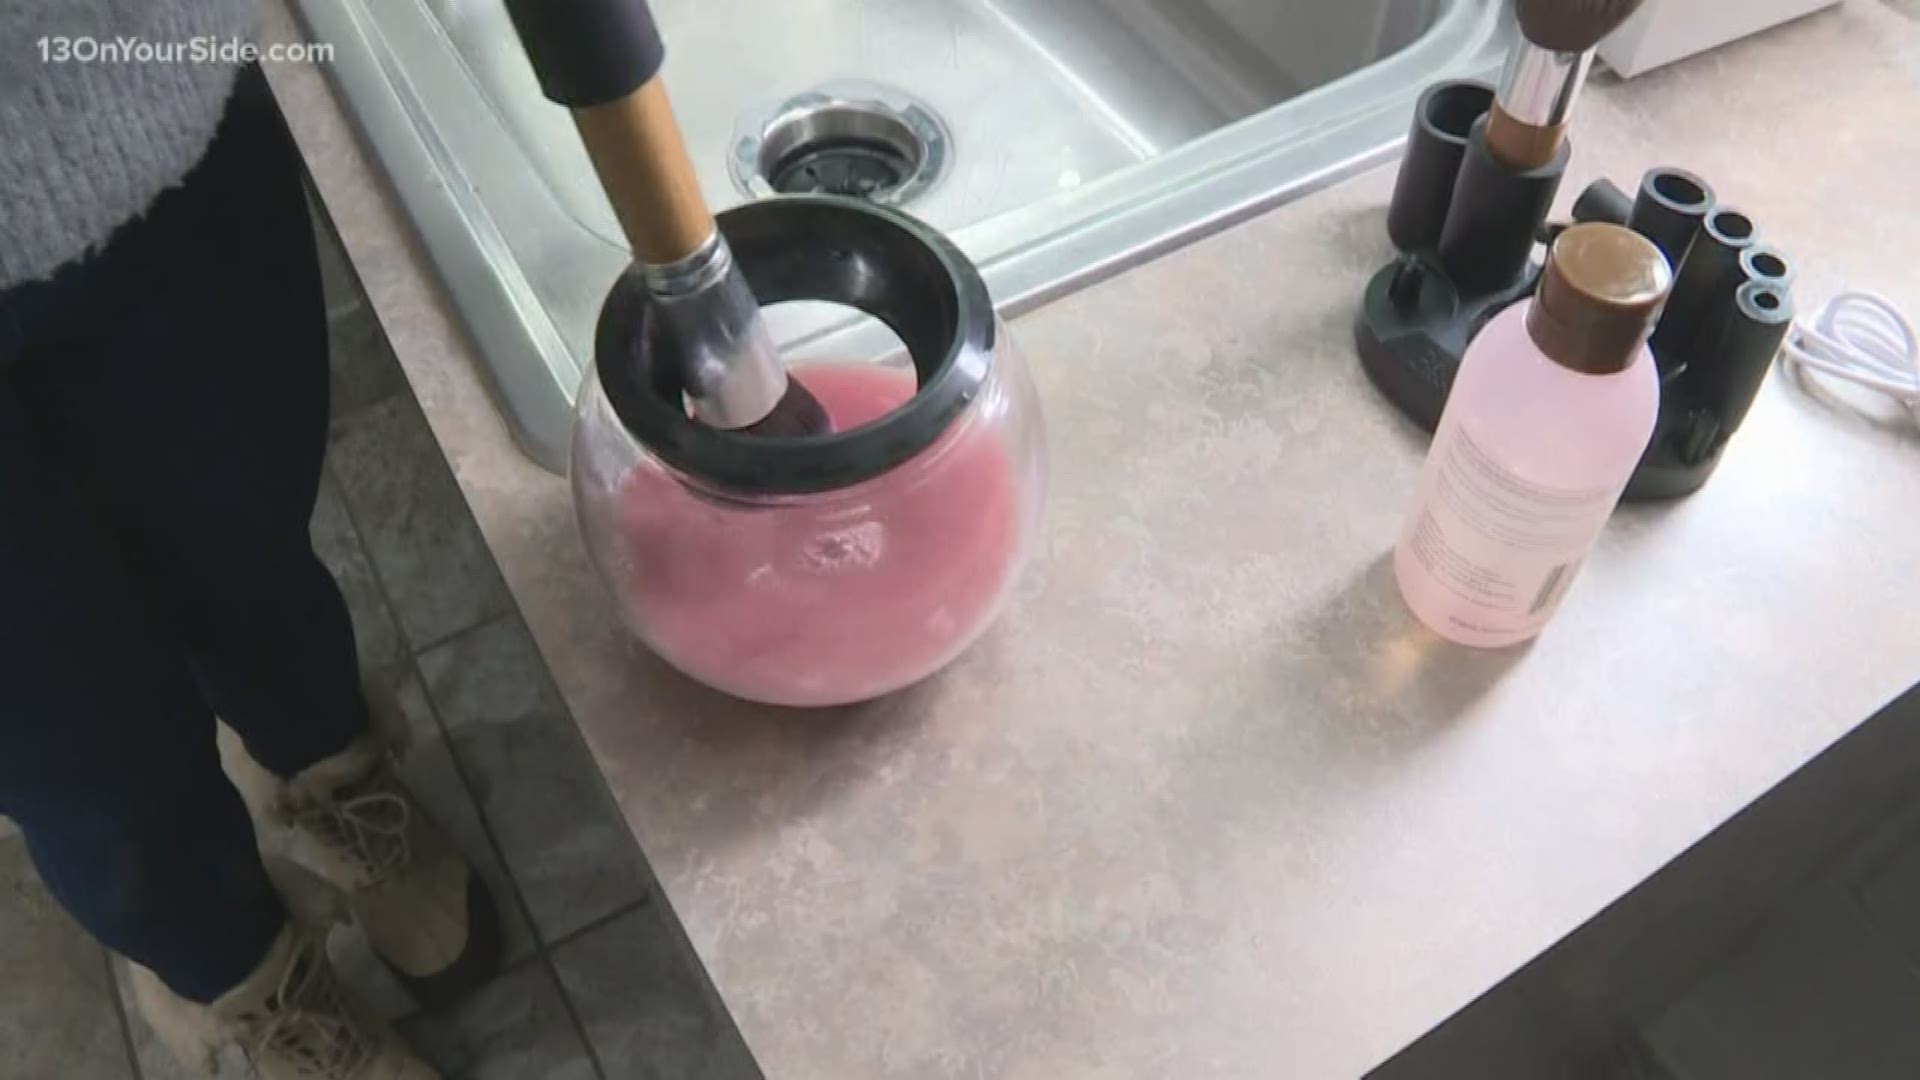 Do you clean your makeup brushes often? In the latest edition of "Try It Before You Buy It" Kristin Mazur tests out something that could help you easily change that.